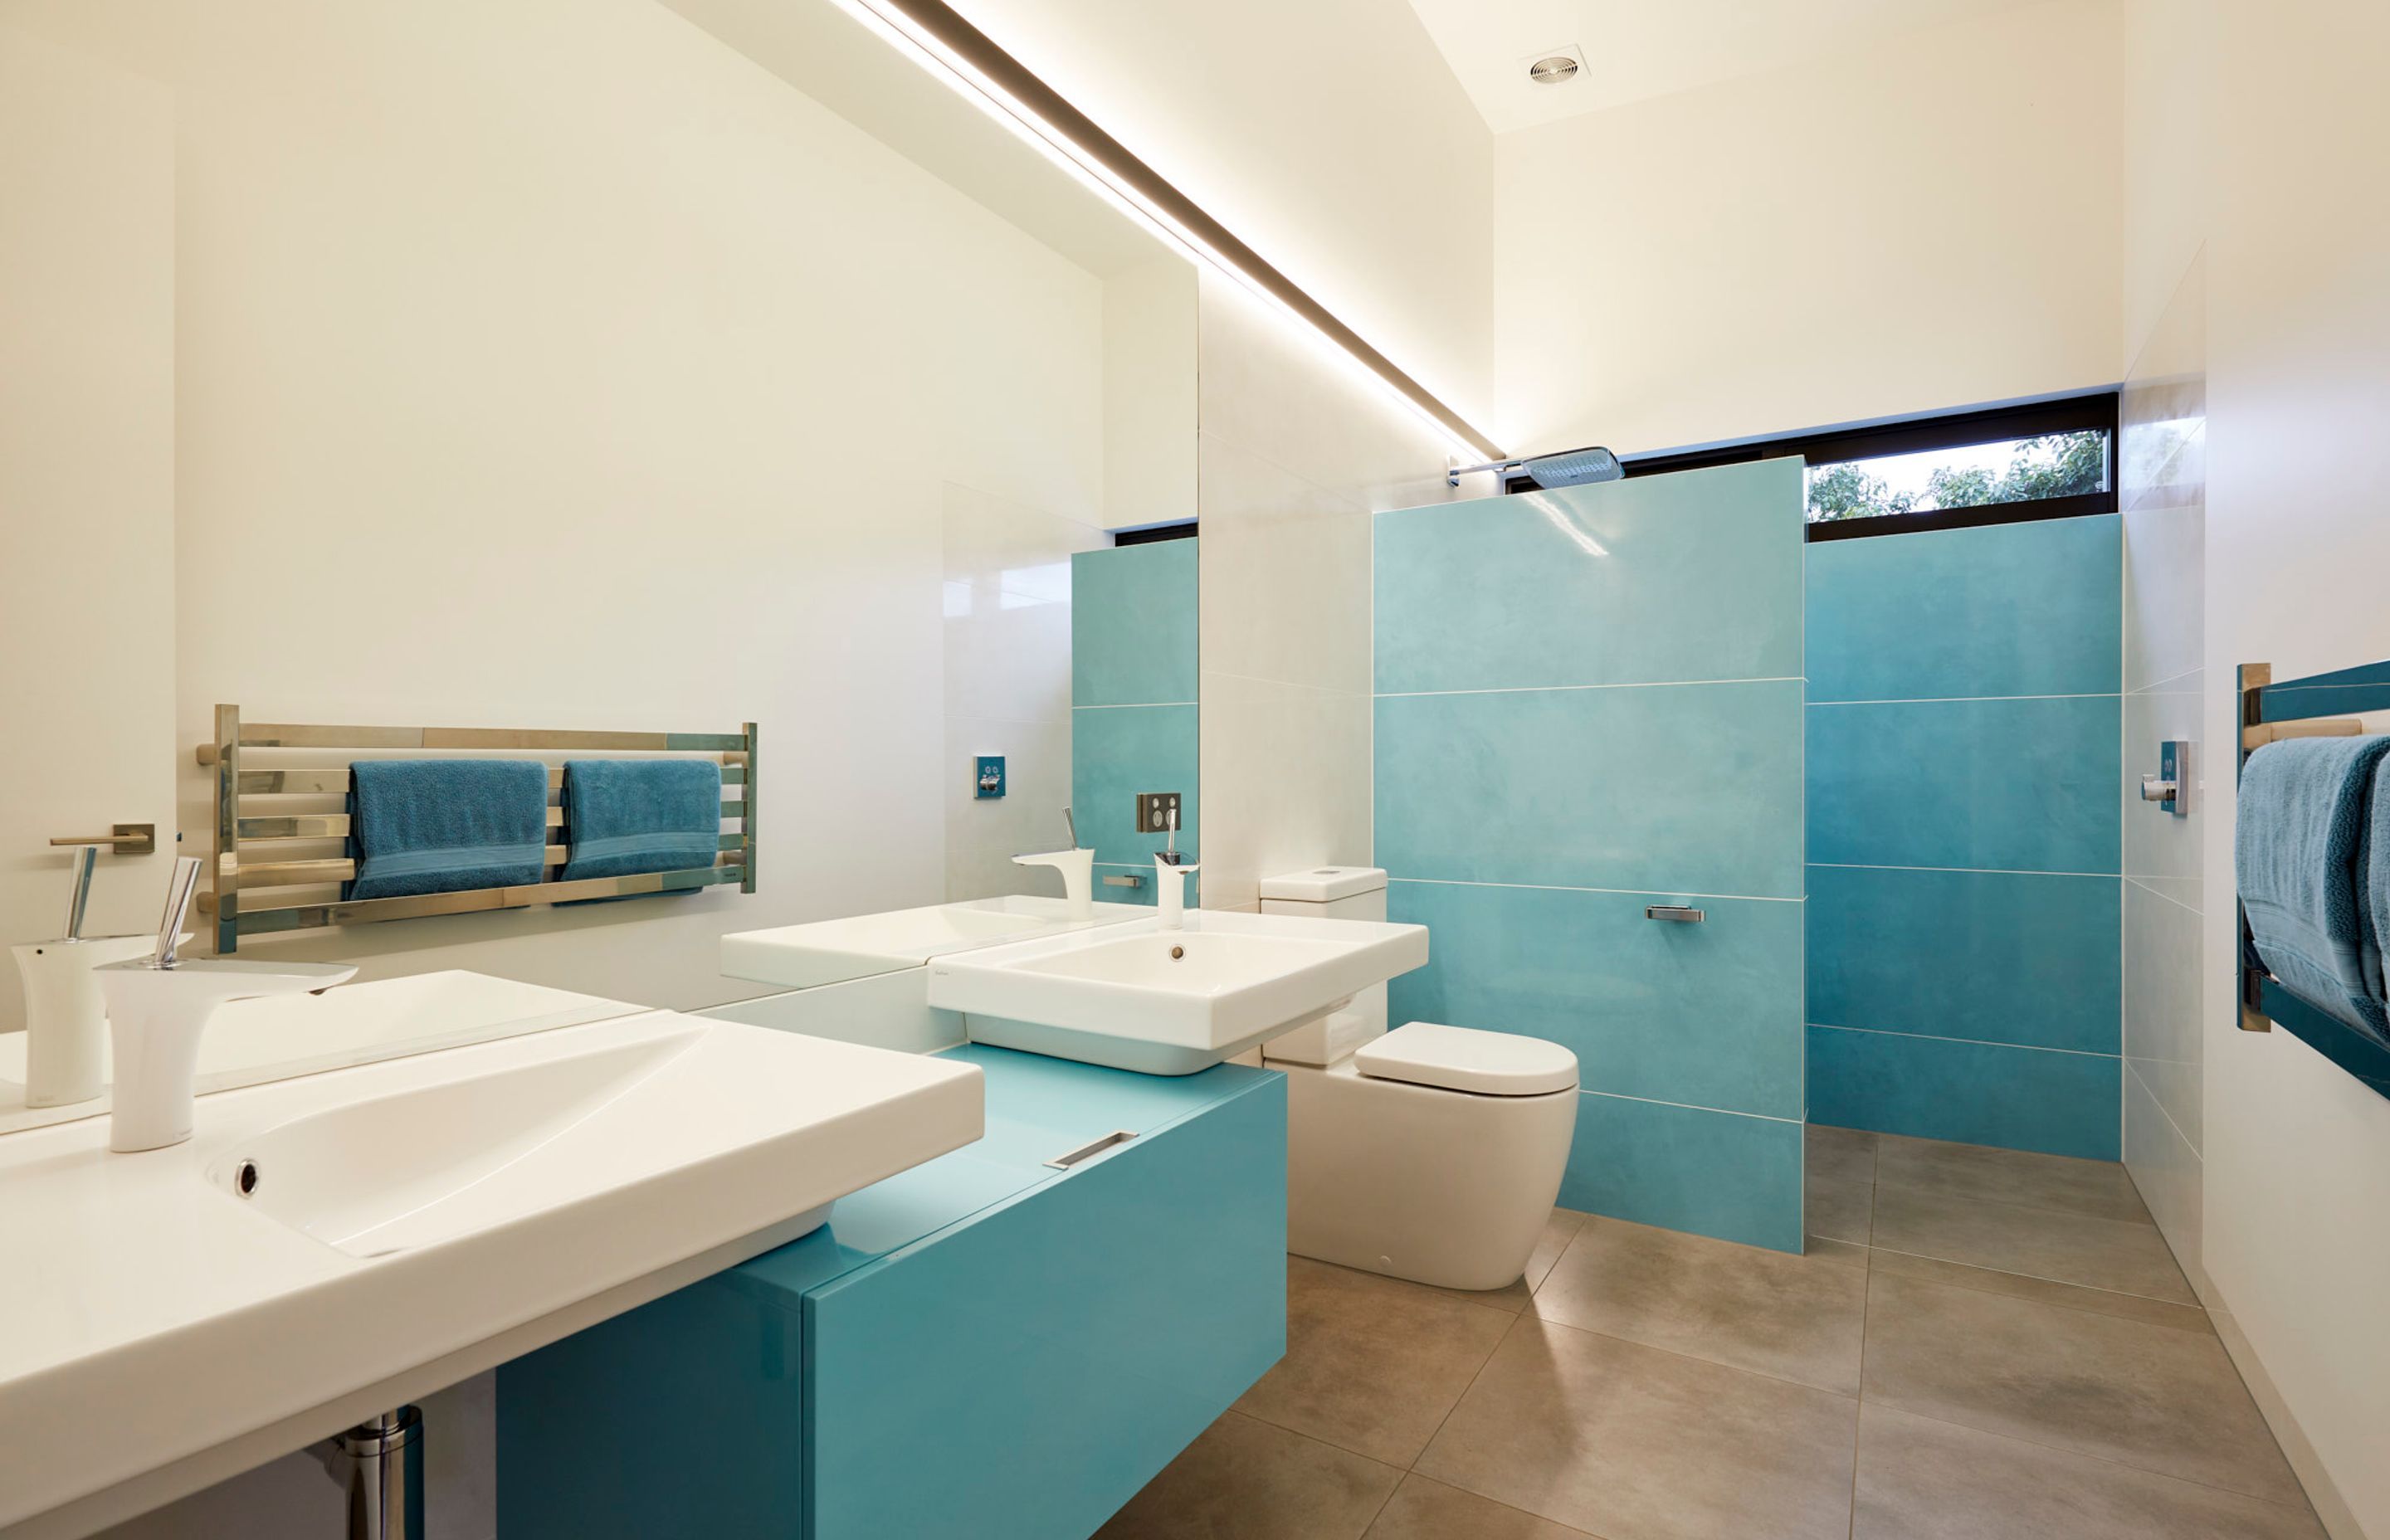 Sophisticated bathroom makes good use of the full solar power system with battery storage and underground storage tanks for collecting the roof water.